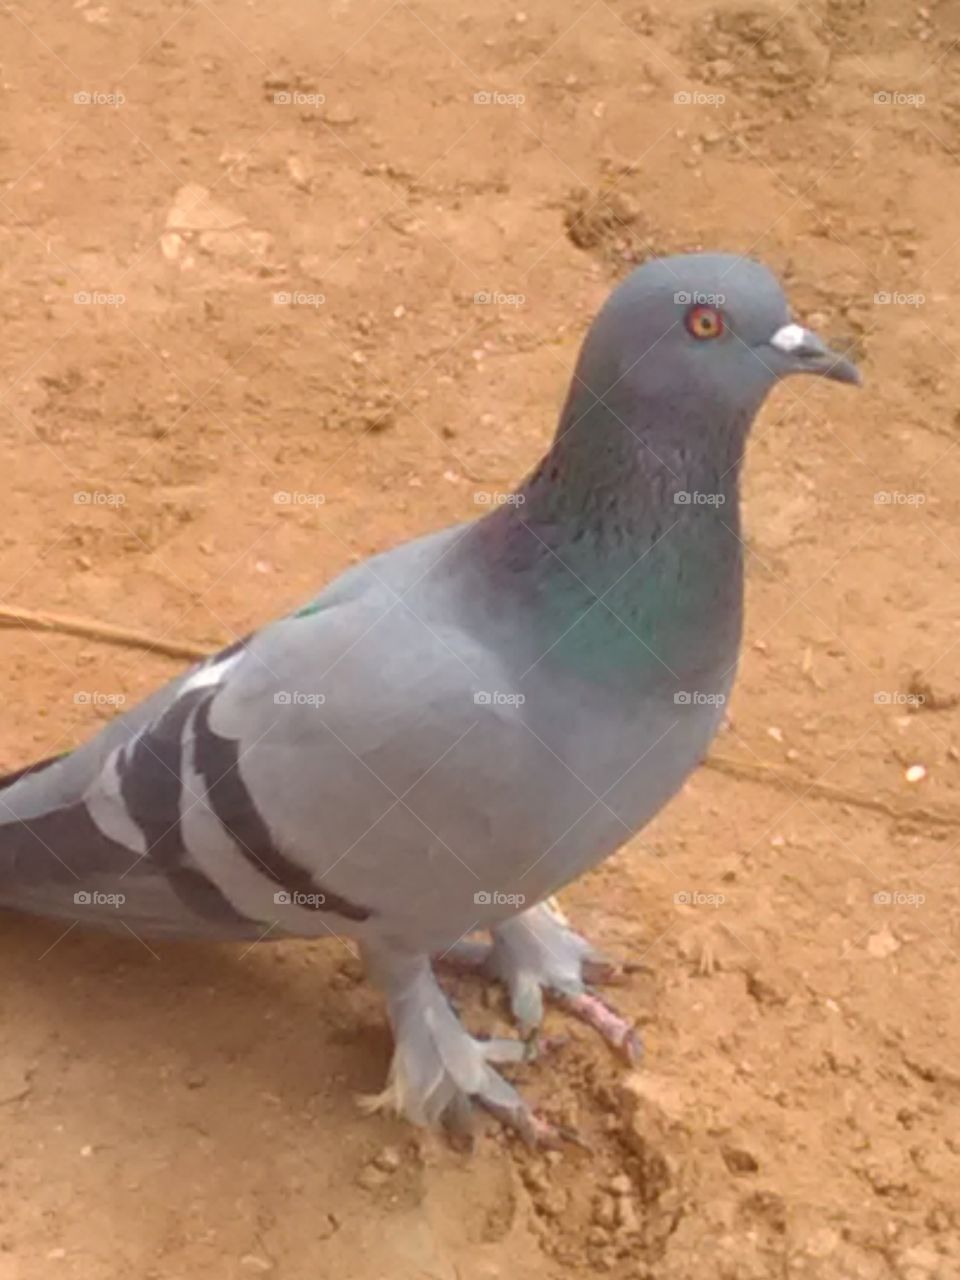 This is indean pigeons. Walking on the road.